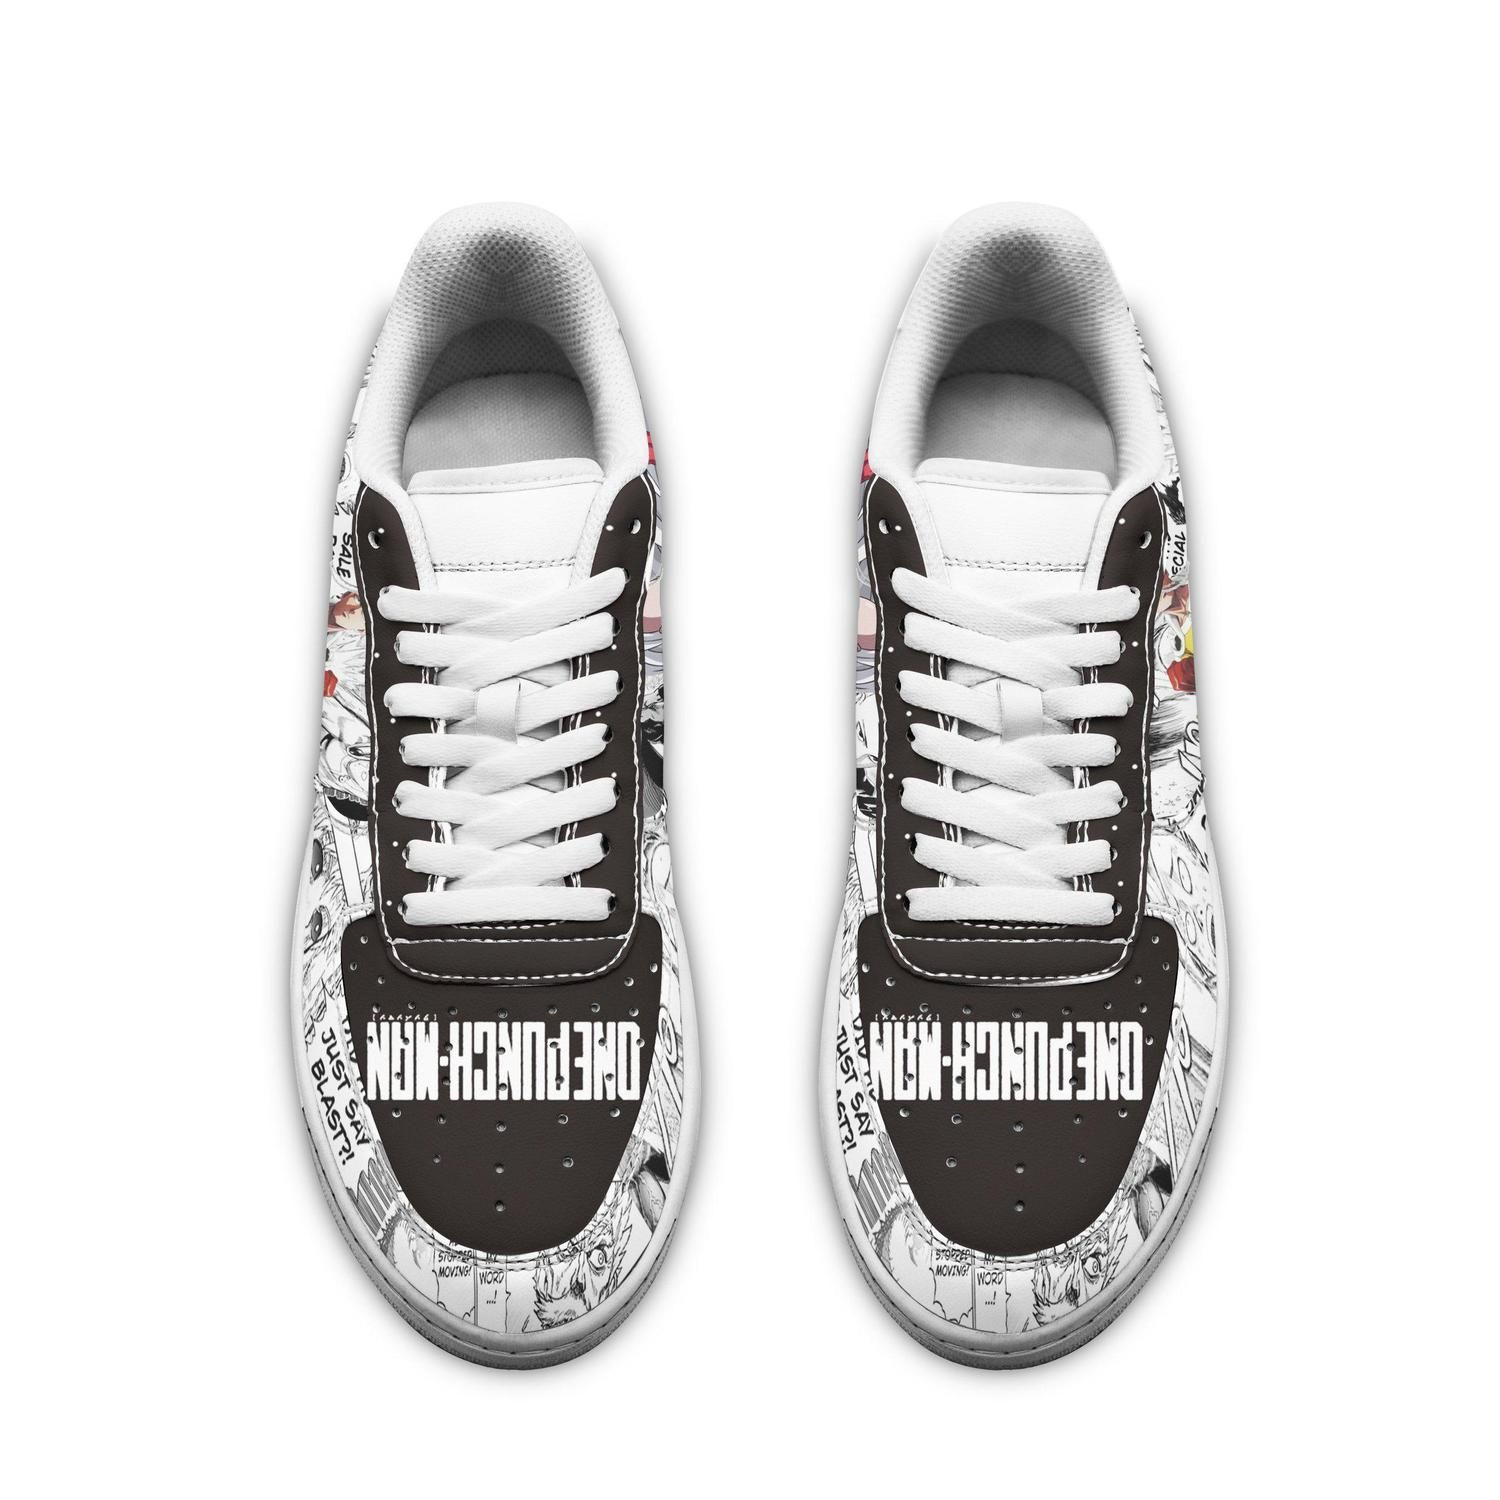 One Punch Man Anime Air Force 1 Sneaker Shoes